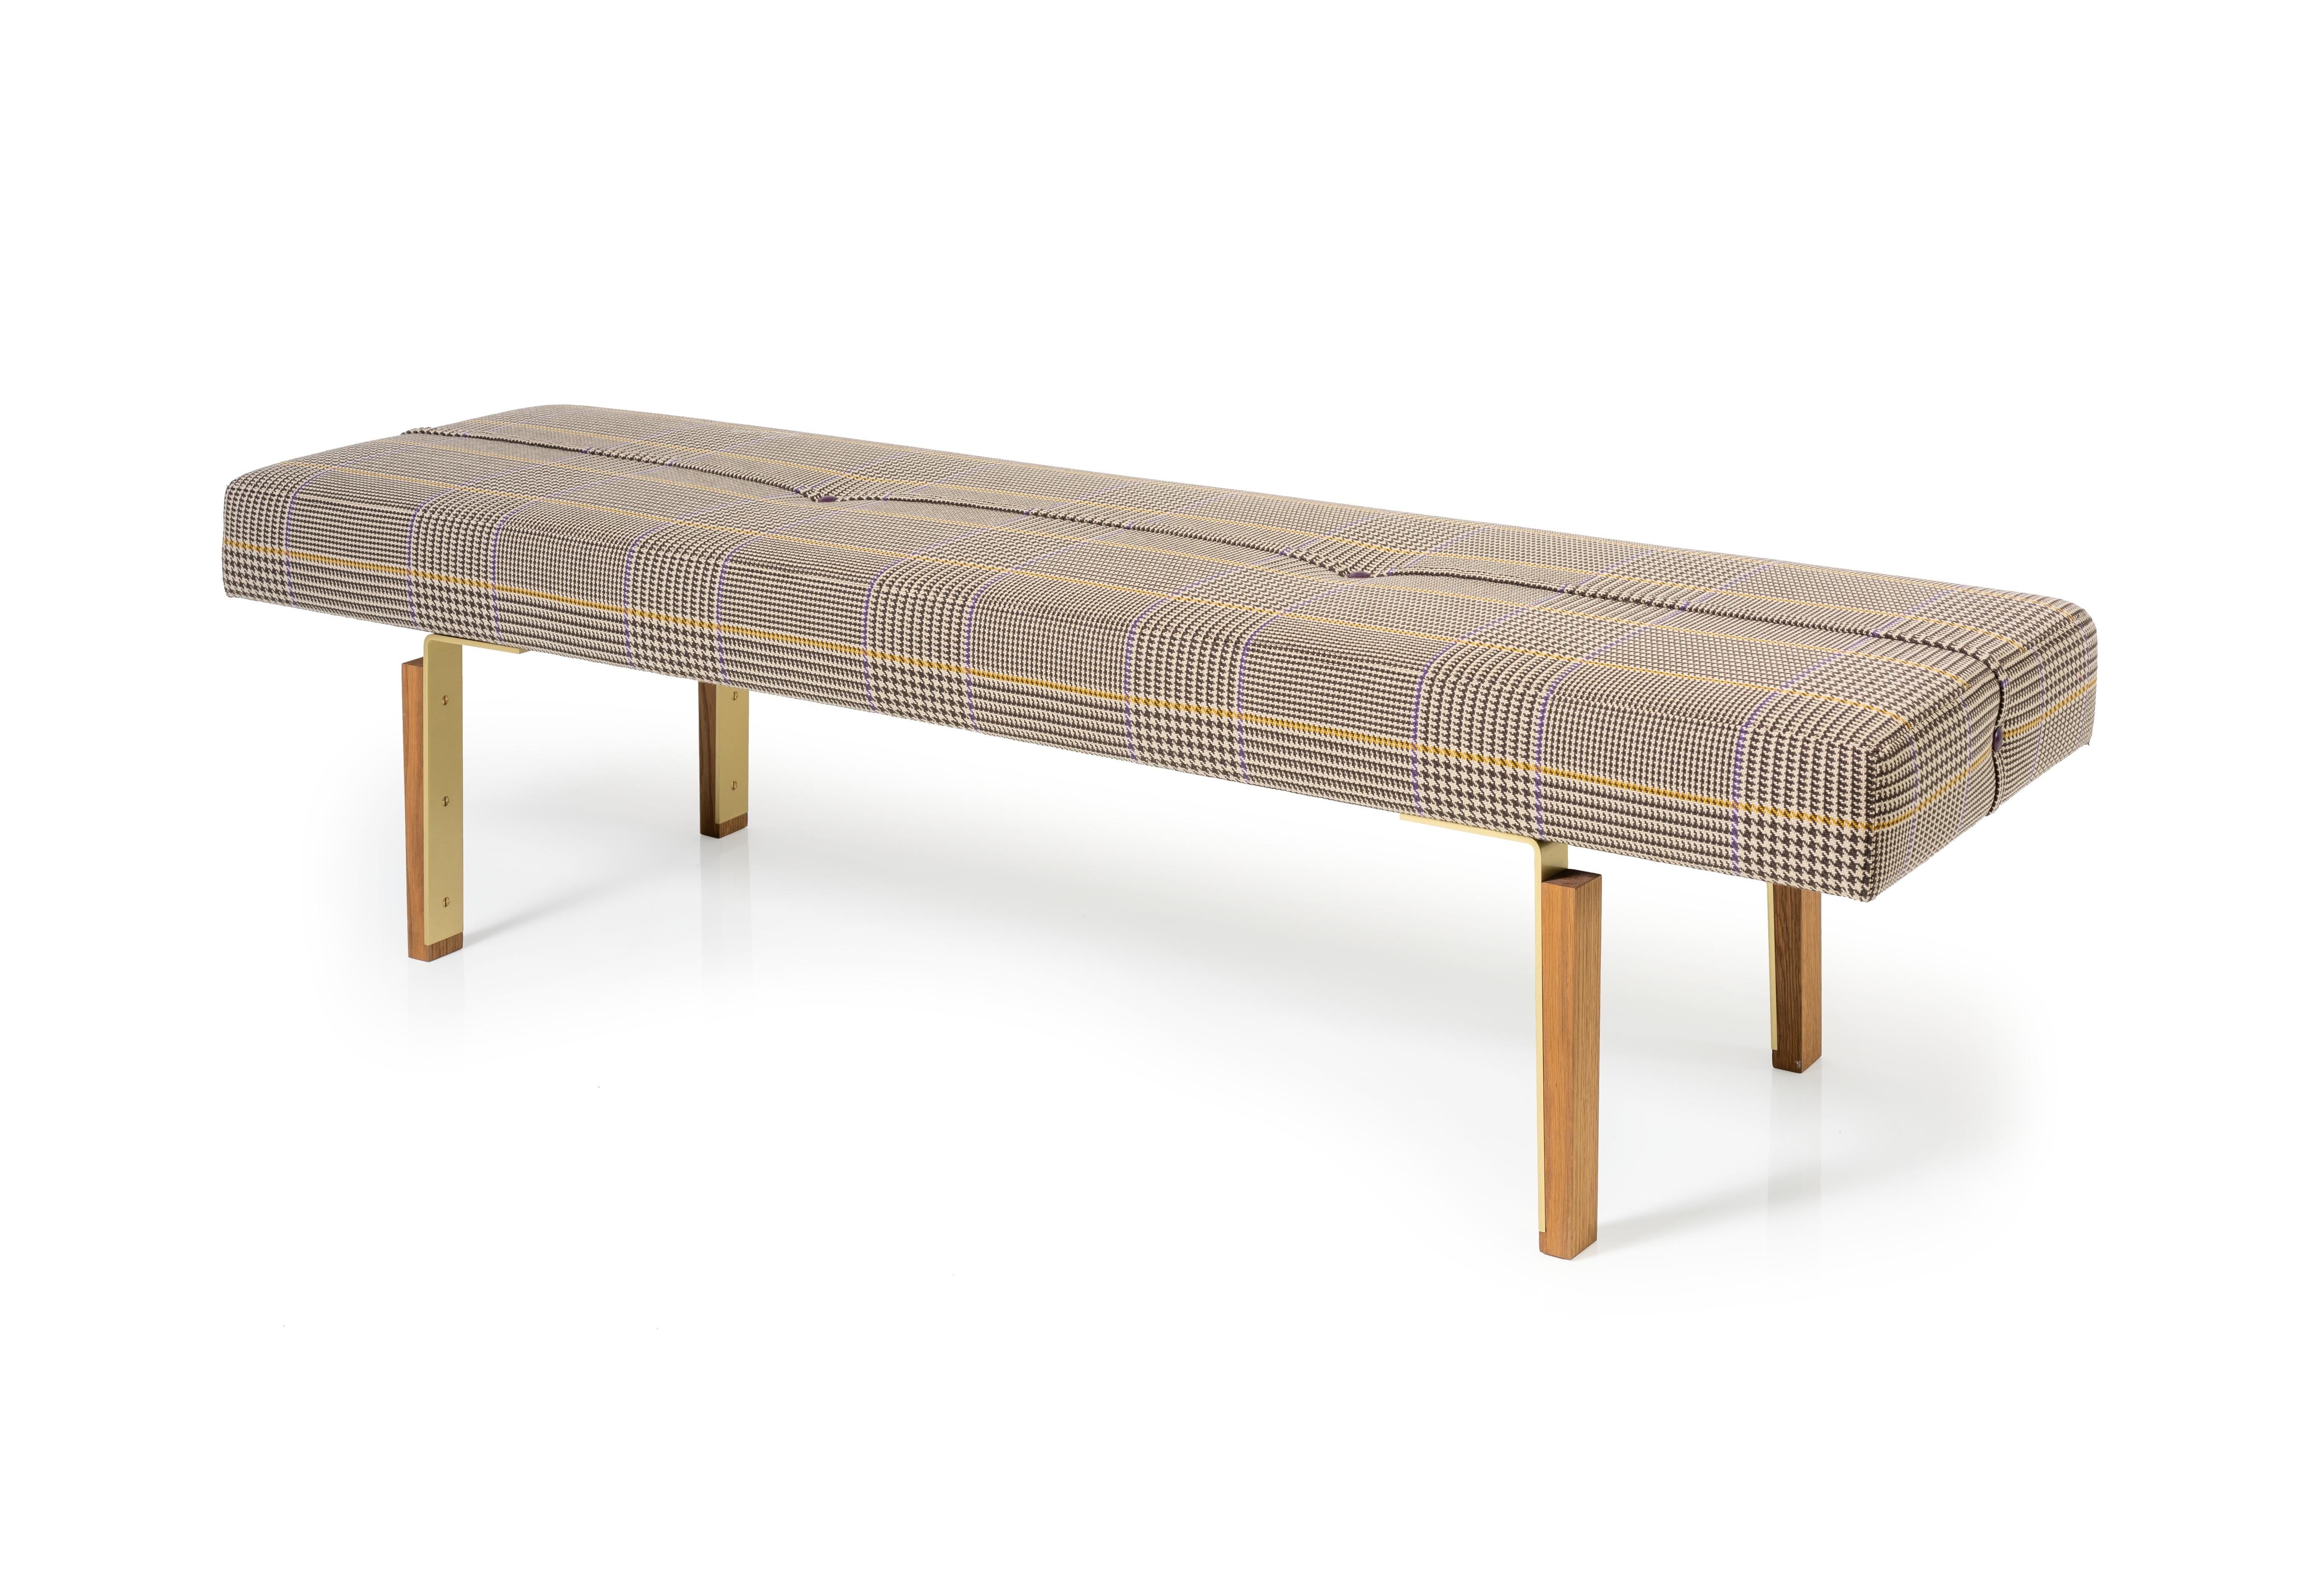 The simple, refined silhouette of the Parisi Bench makes it a perfect entry or footboard piece. Brakeformed, Solid Brass legs are integrated into blocks of Fumed White Oak. Featuring a Tweed wool fabric.

This is a natural product that may have